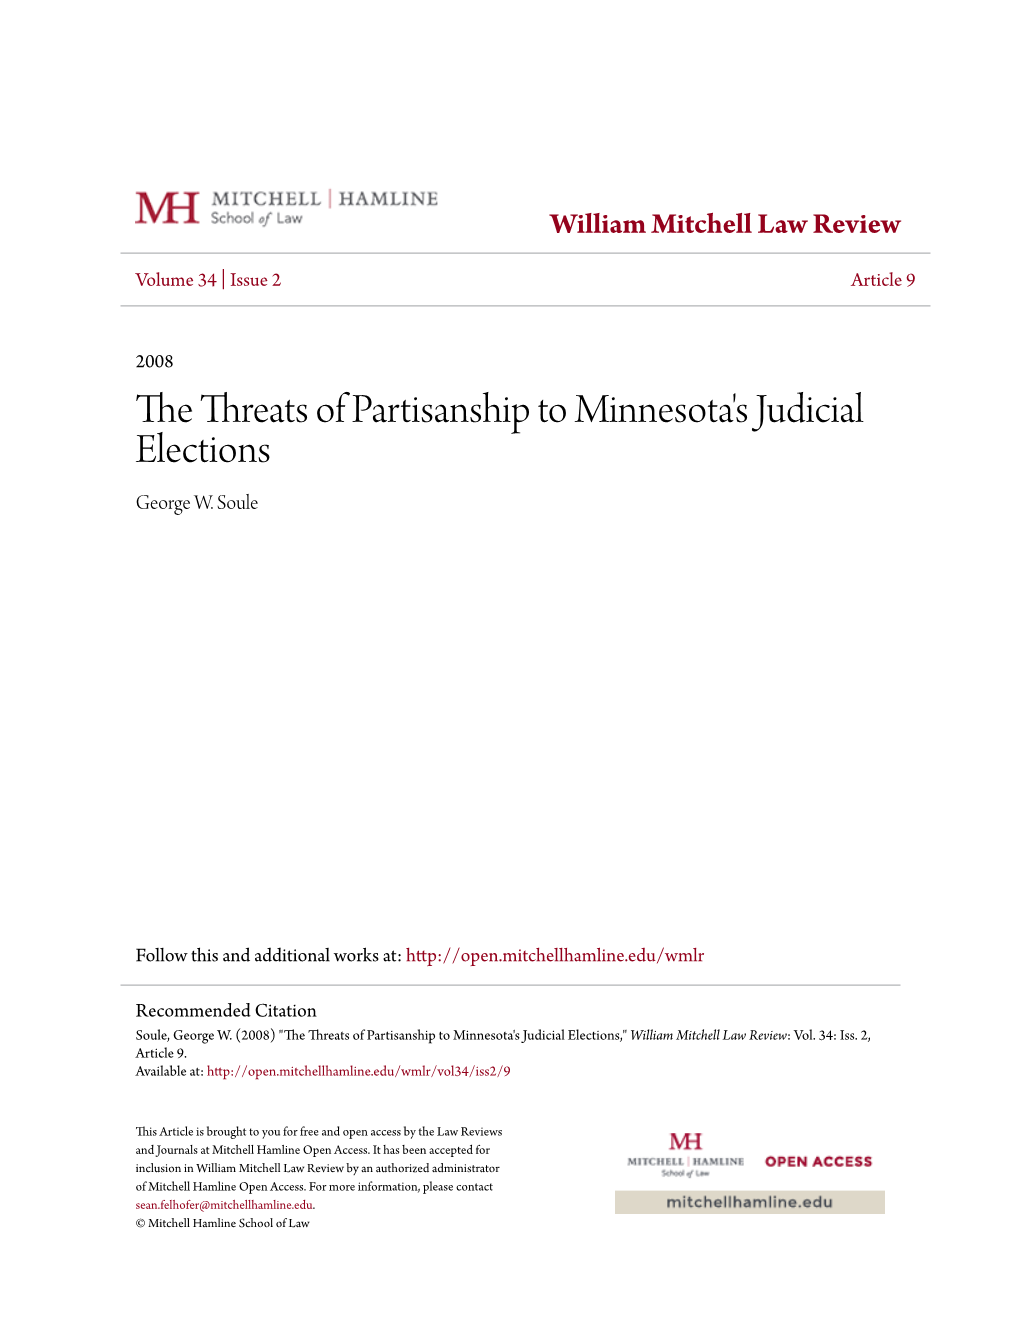 The Threats of Partisanship to Minnesota's Judicial Elections George W